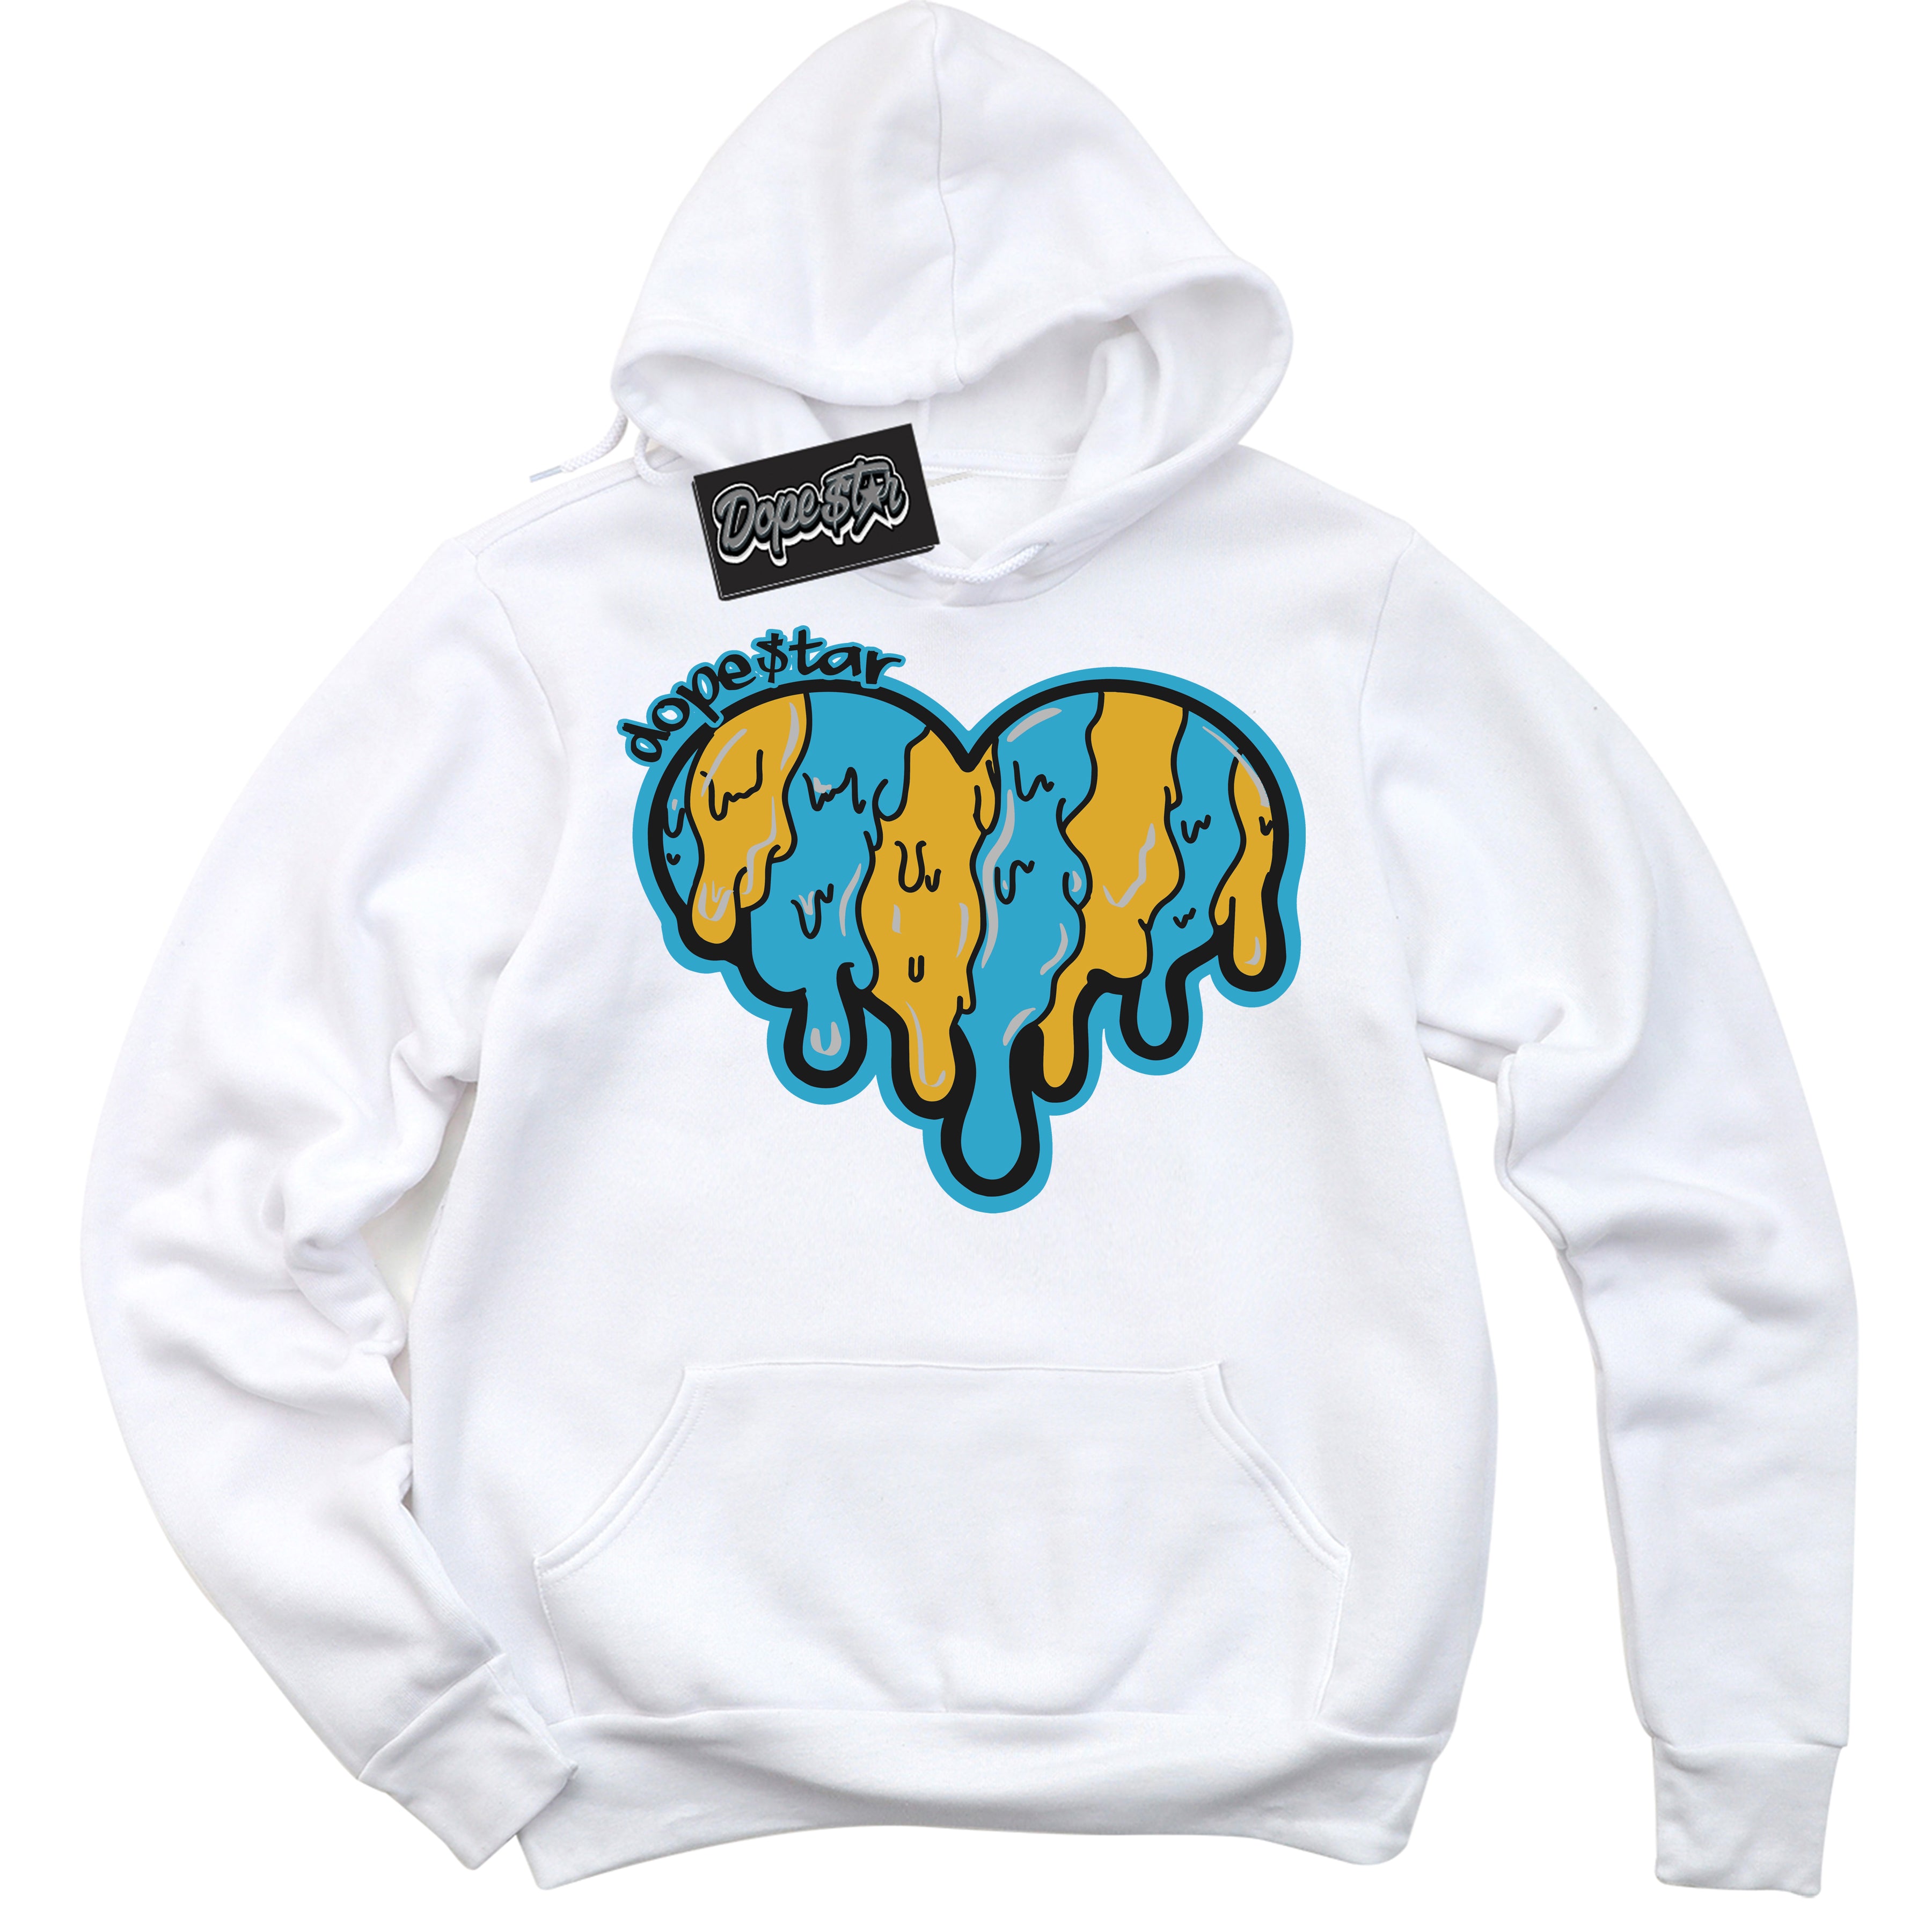 Cool White Hoodie with “ Melting Heart ”  design that Perfectly Matches Aqua 5s Sneakers.